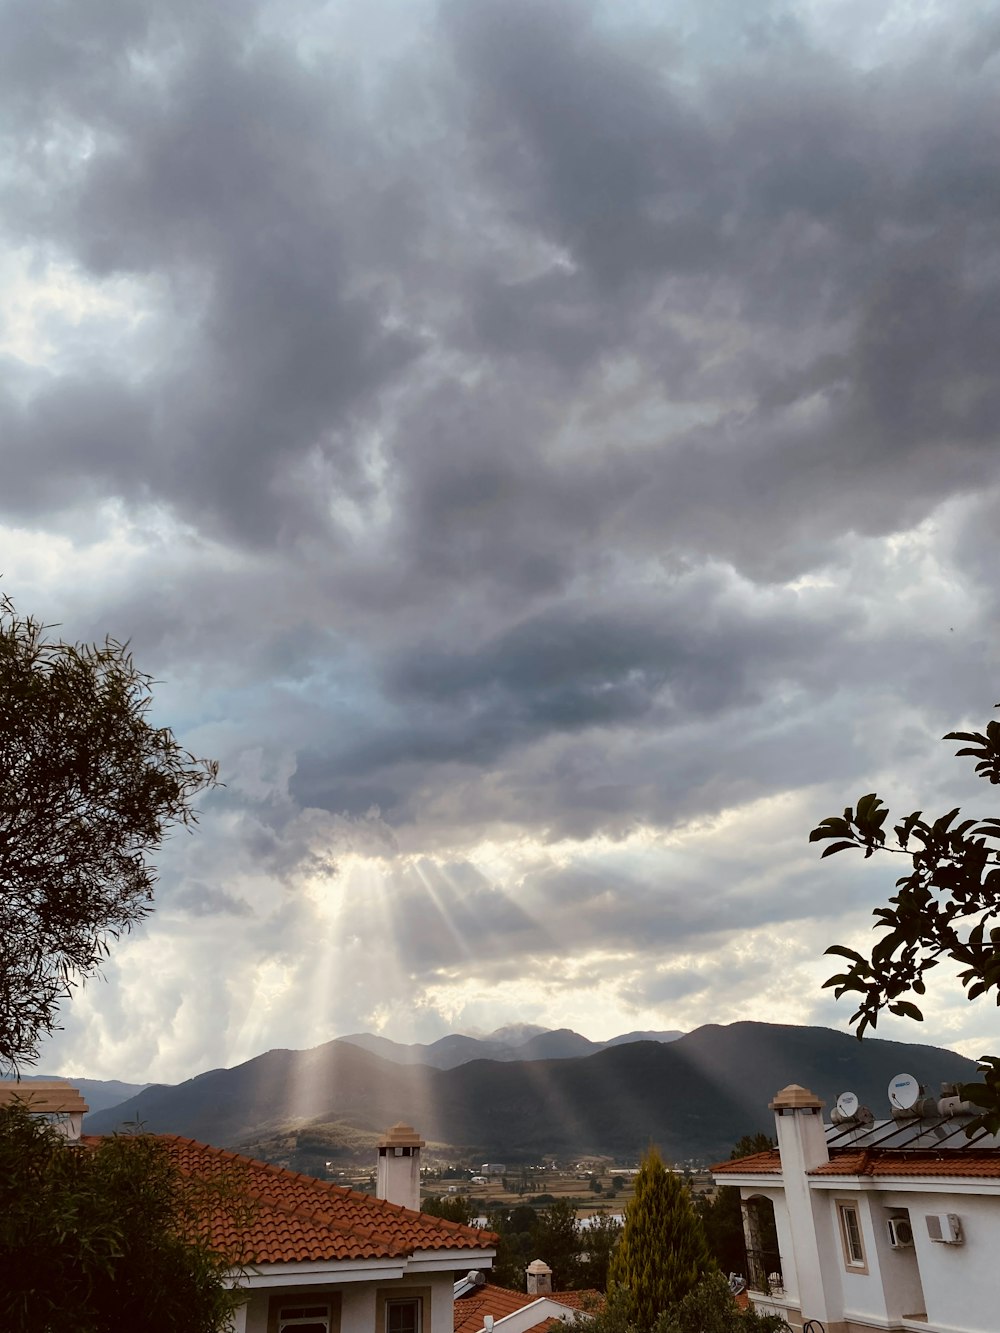 the sun shines through the clouds over a residential area